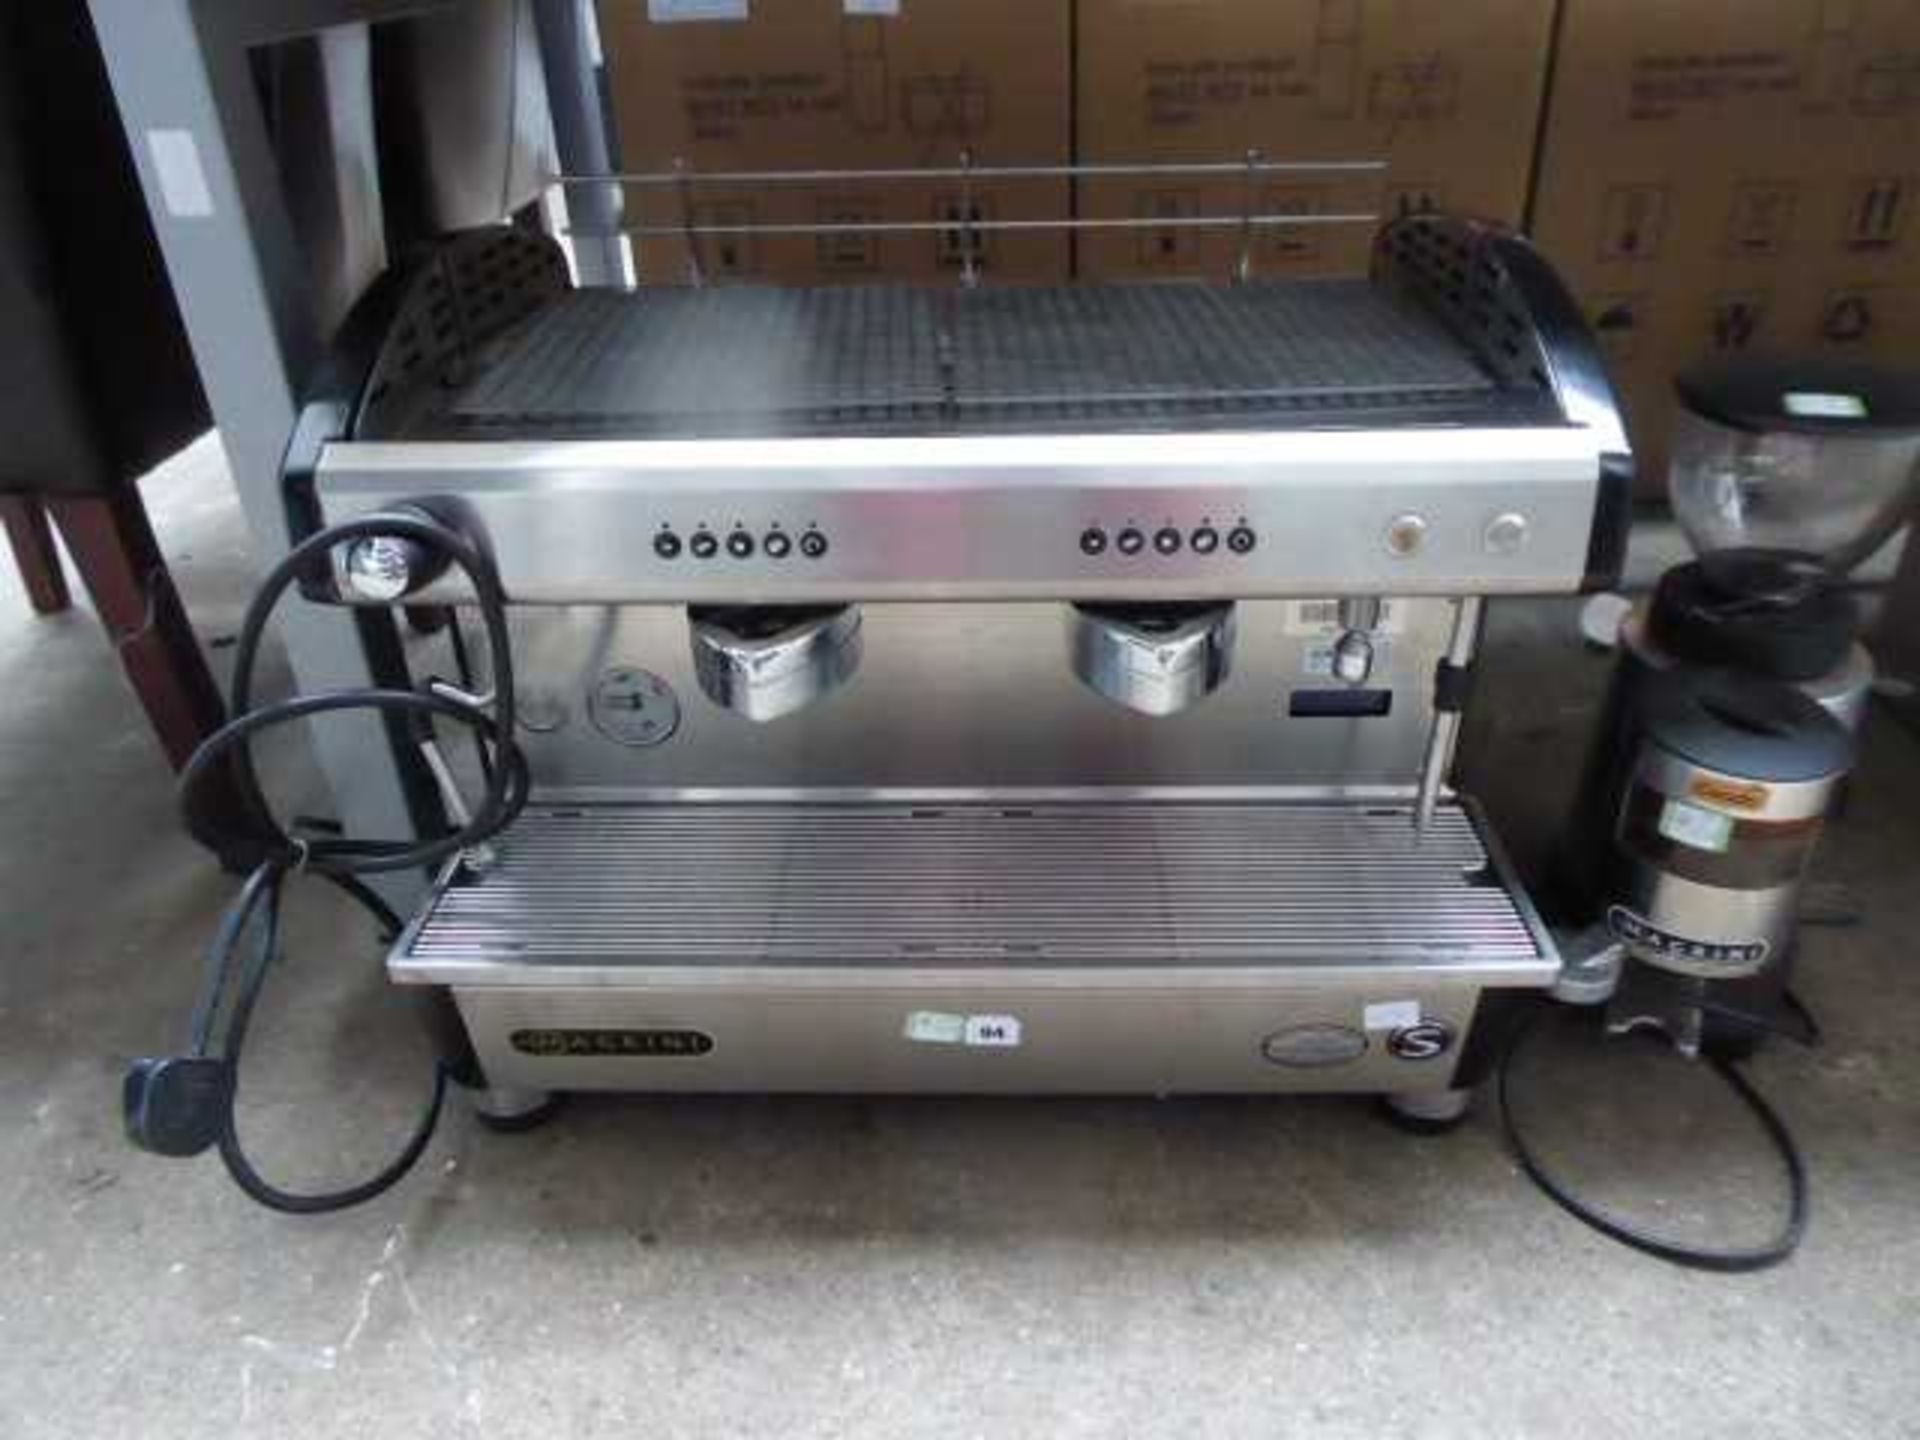 470 - (TN30) 70cm Magrini S series automatic 2 station coffee machine with 2 groupheads and a